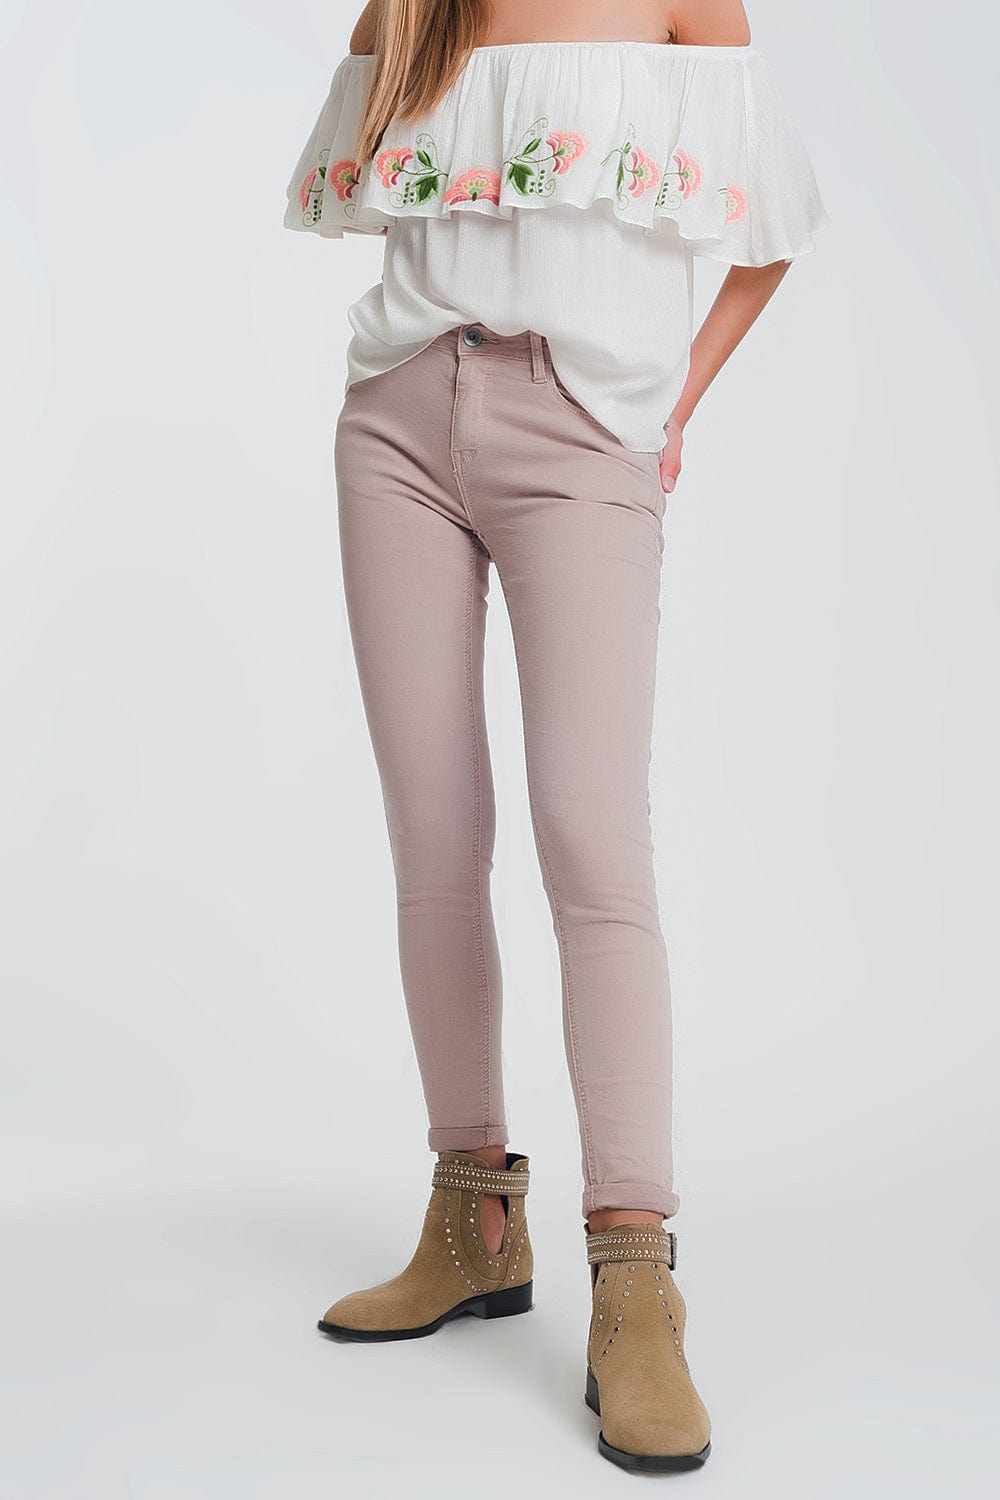 Q2 Women's Jean High Waisted Super Skinny Pants in Pink